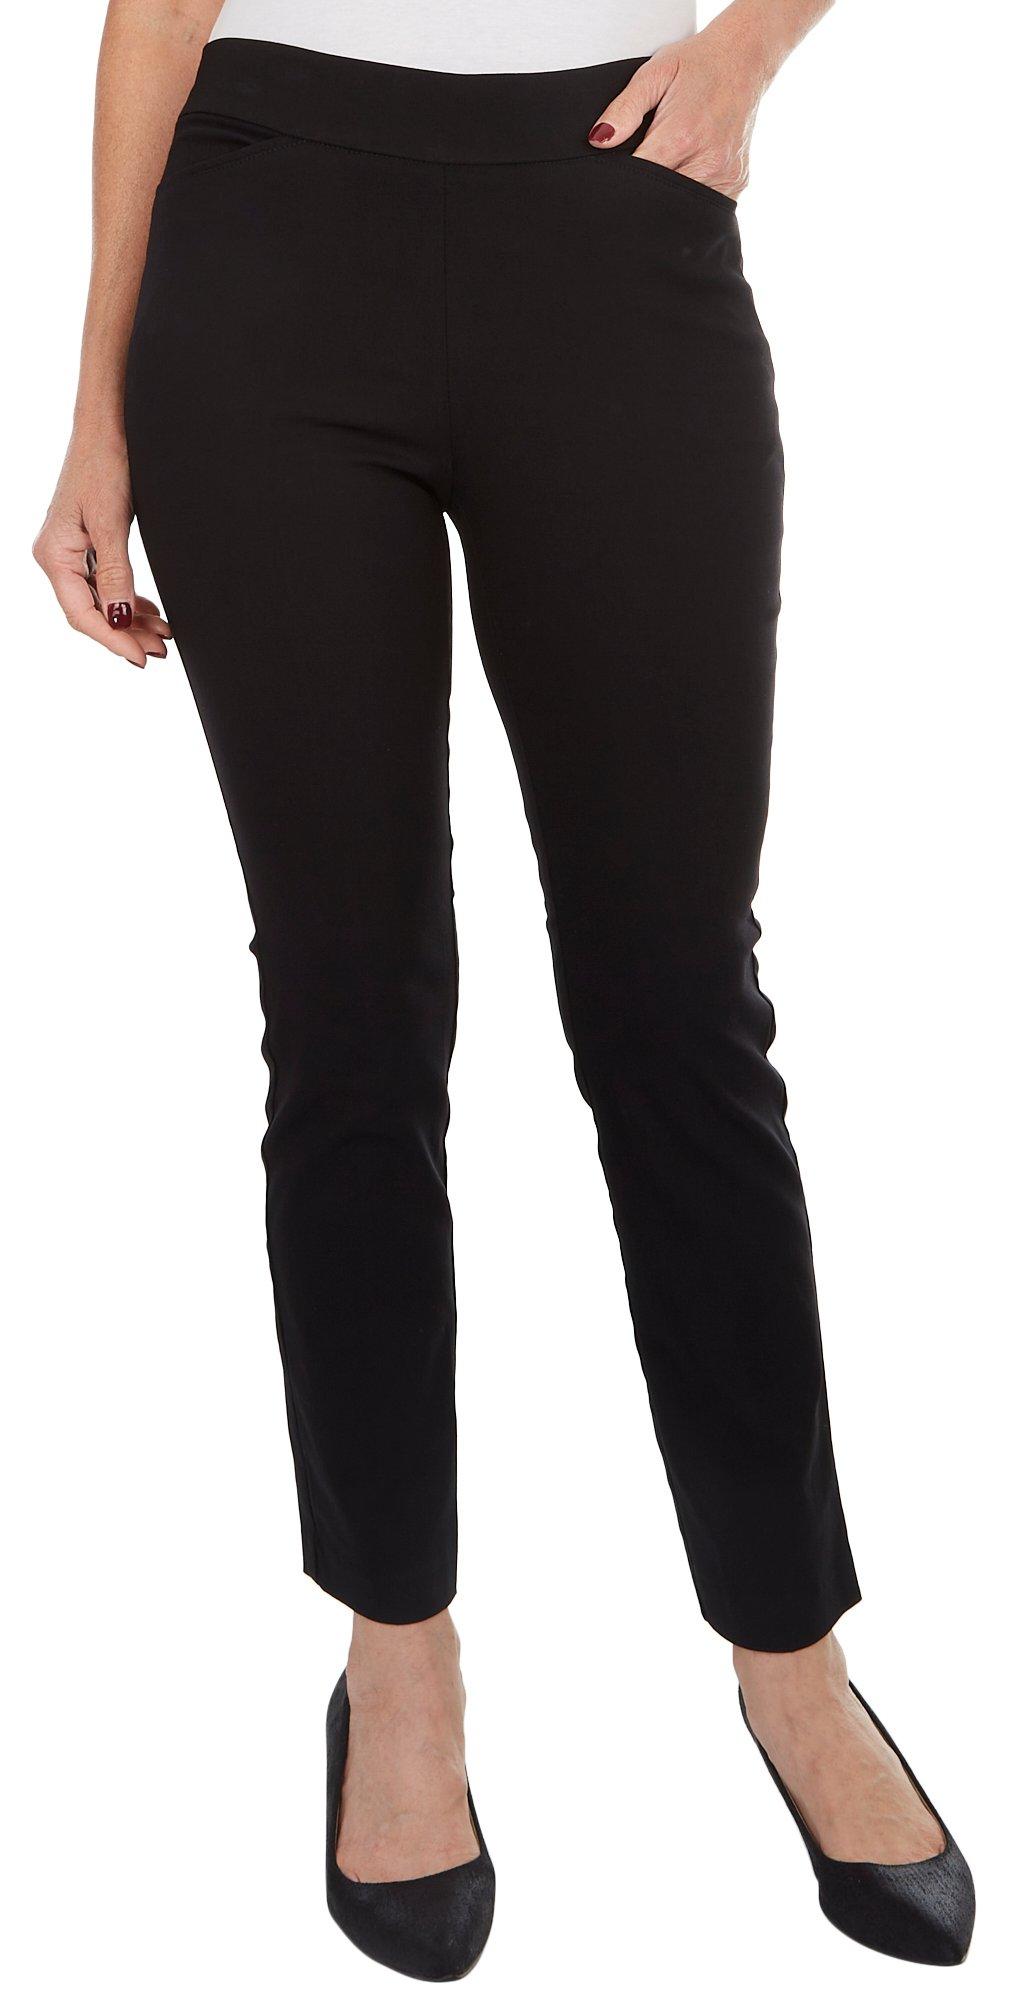 Suave black and white tummy control leggings size SP - $23 - From Cynthia